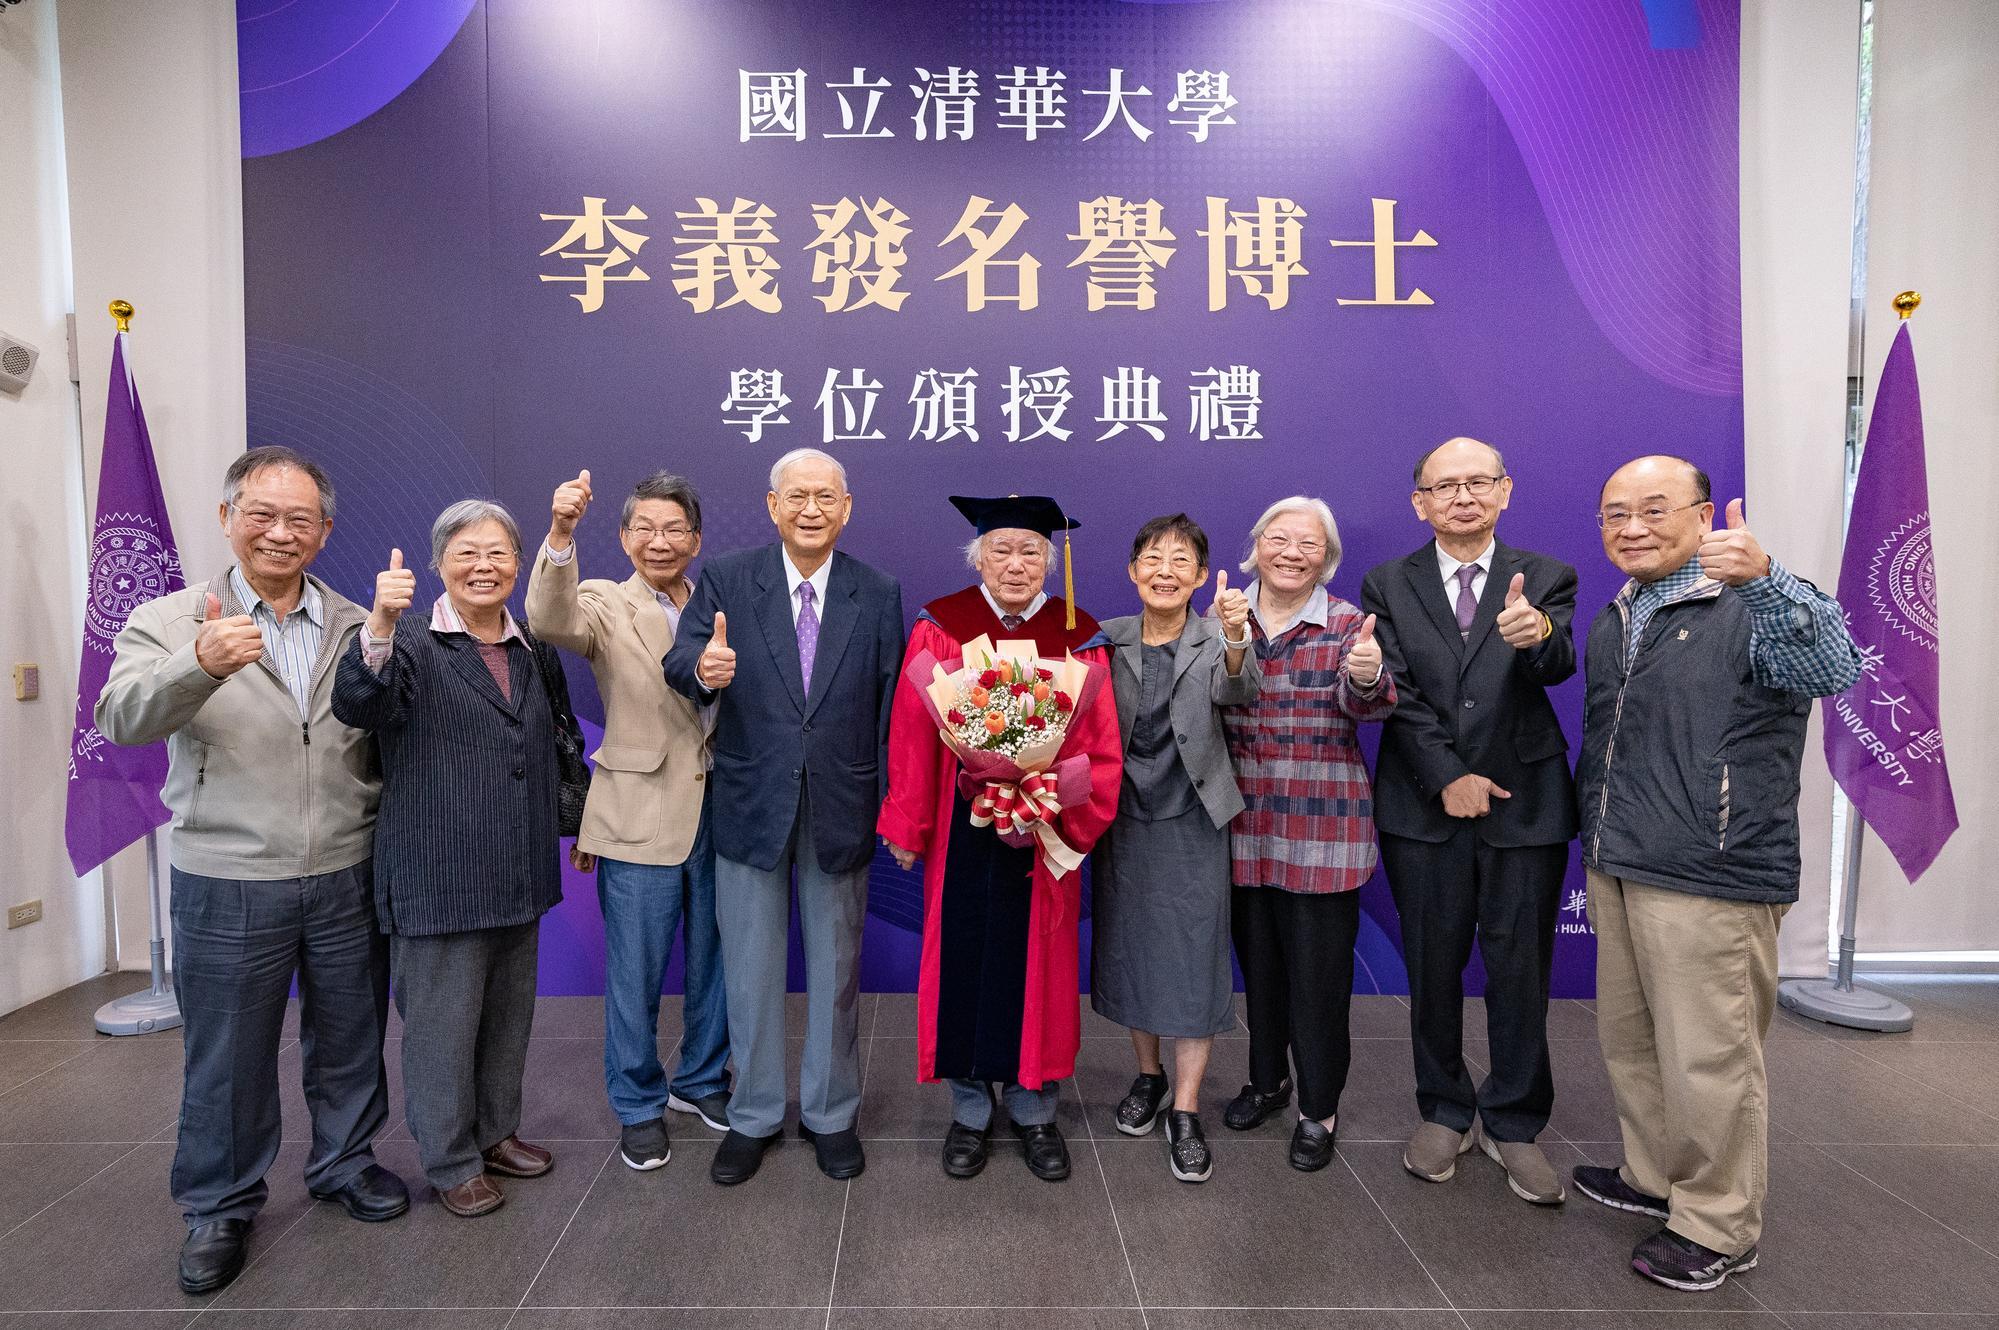 Eight students taught by Dr. Yi-Fa Lee (李義發) half a century ago attended the ceremony where their mentor received an honorary doctorate.